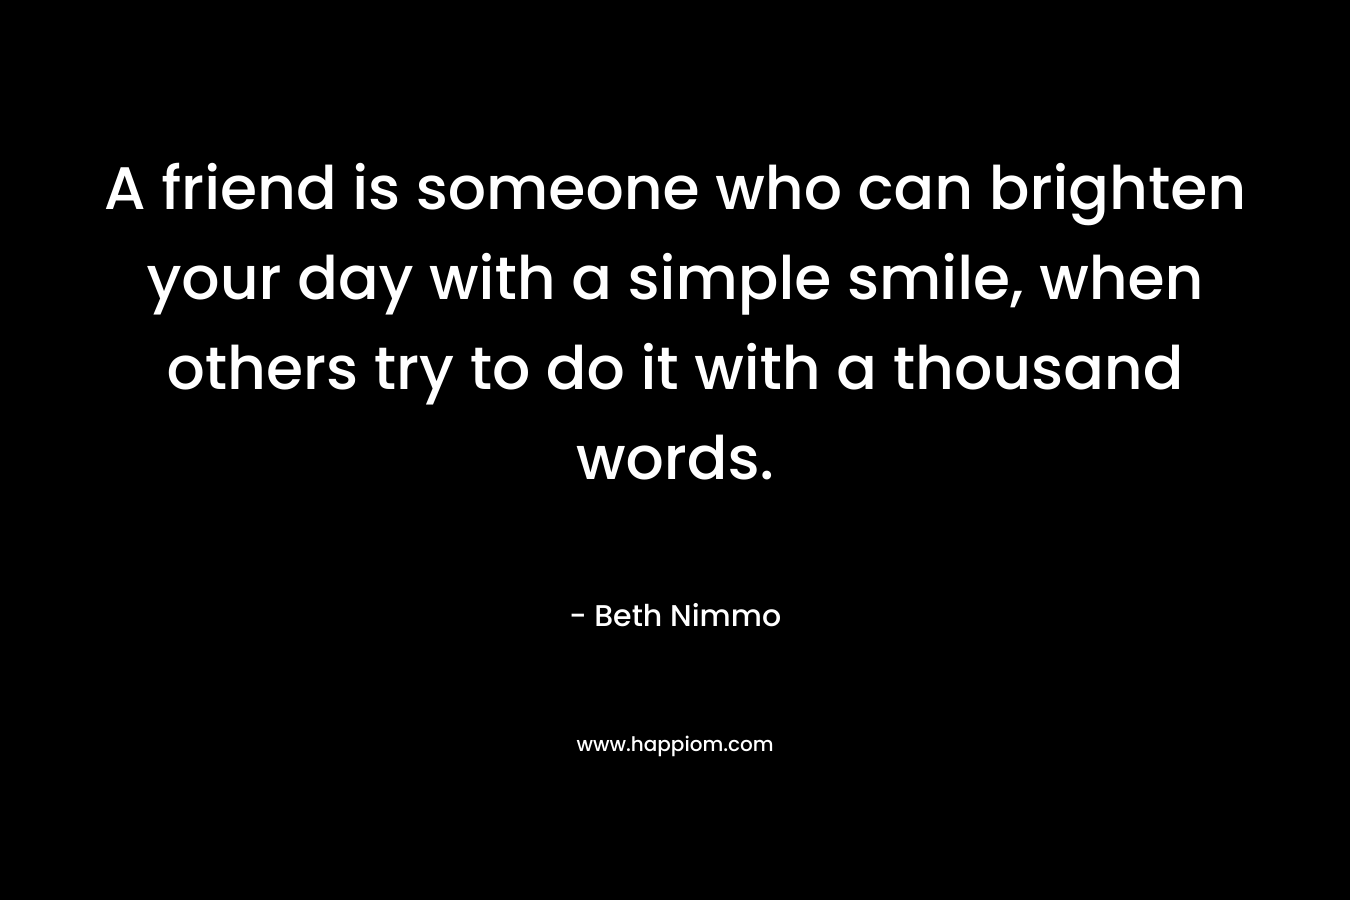 A friend is someone who can brighten your day with a simple smile, when others try to do it with a thousand words.